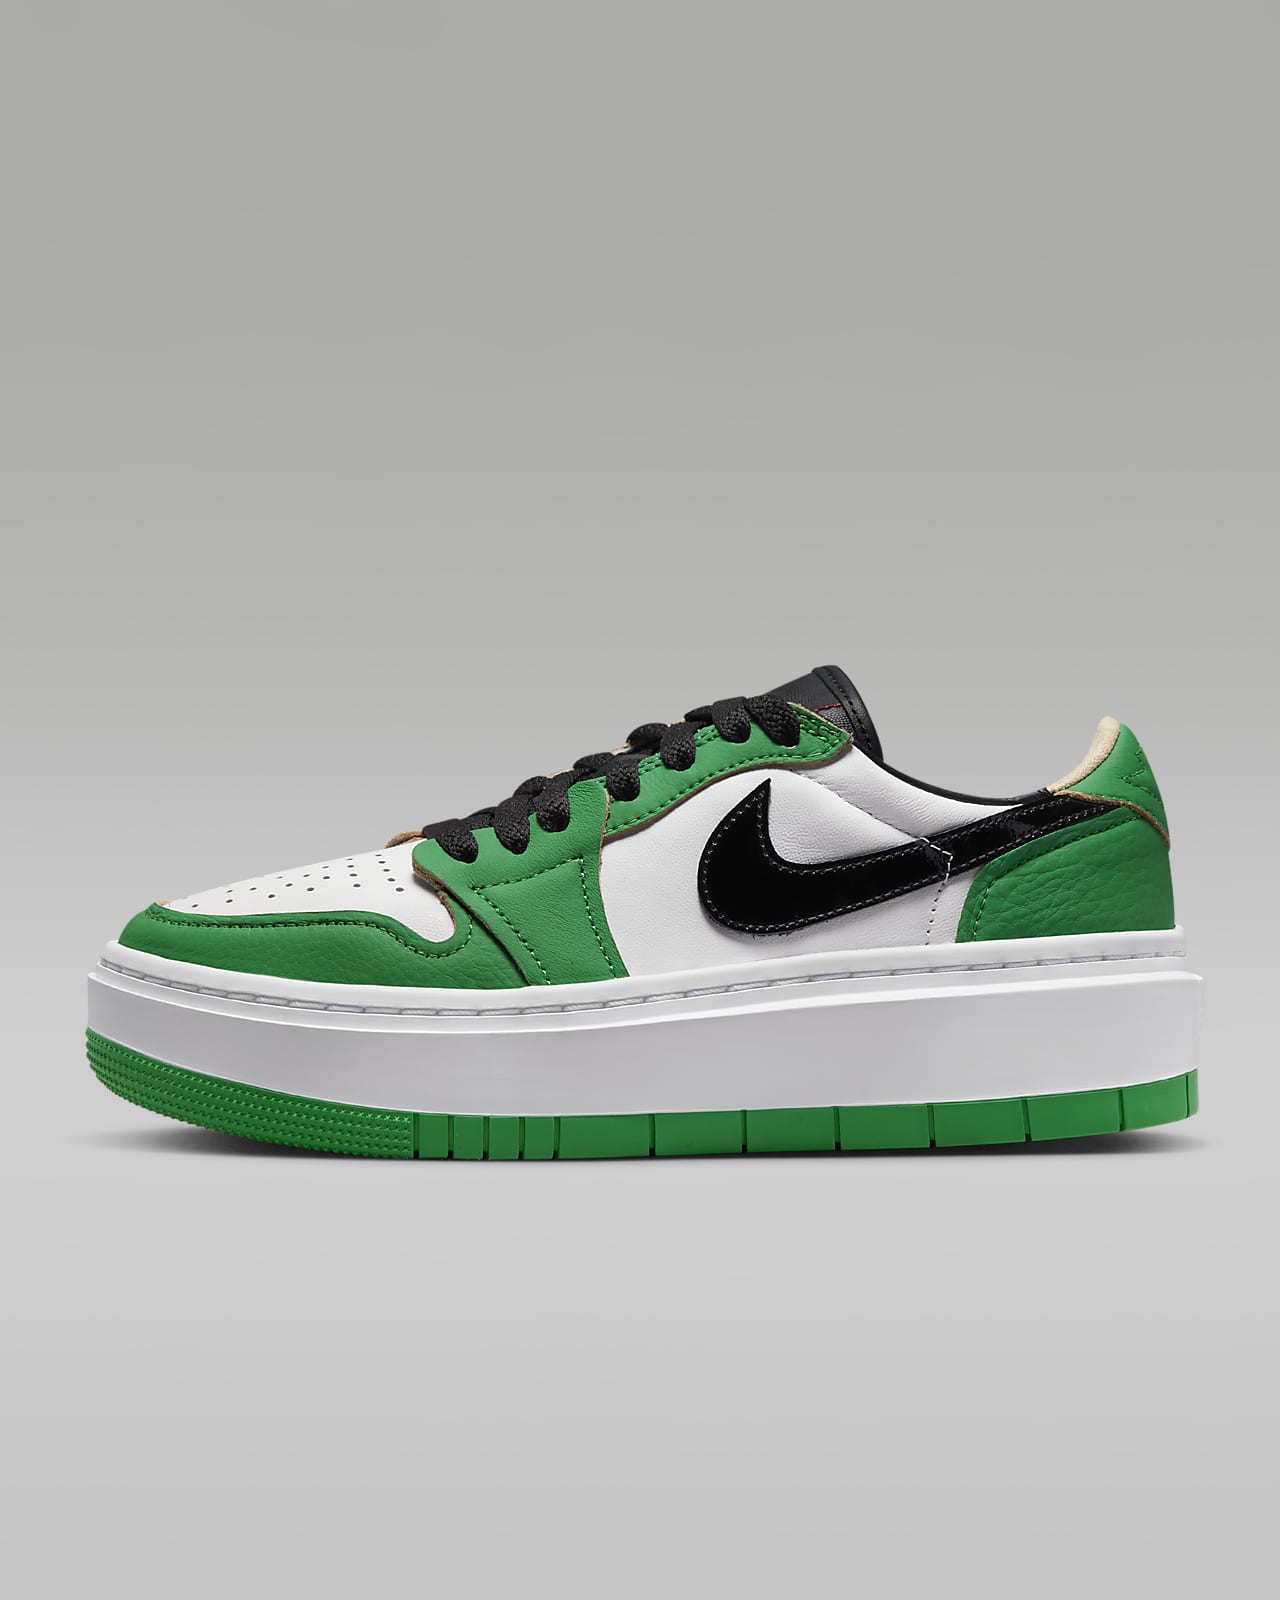 Nike Satin Green Dunks Women | Green shoes outfit, Green shoes, Dunk outfits